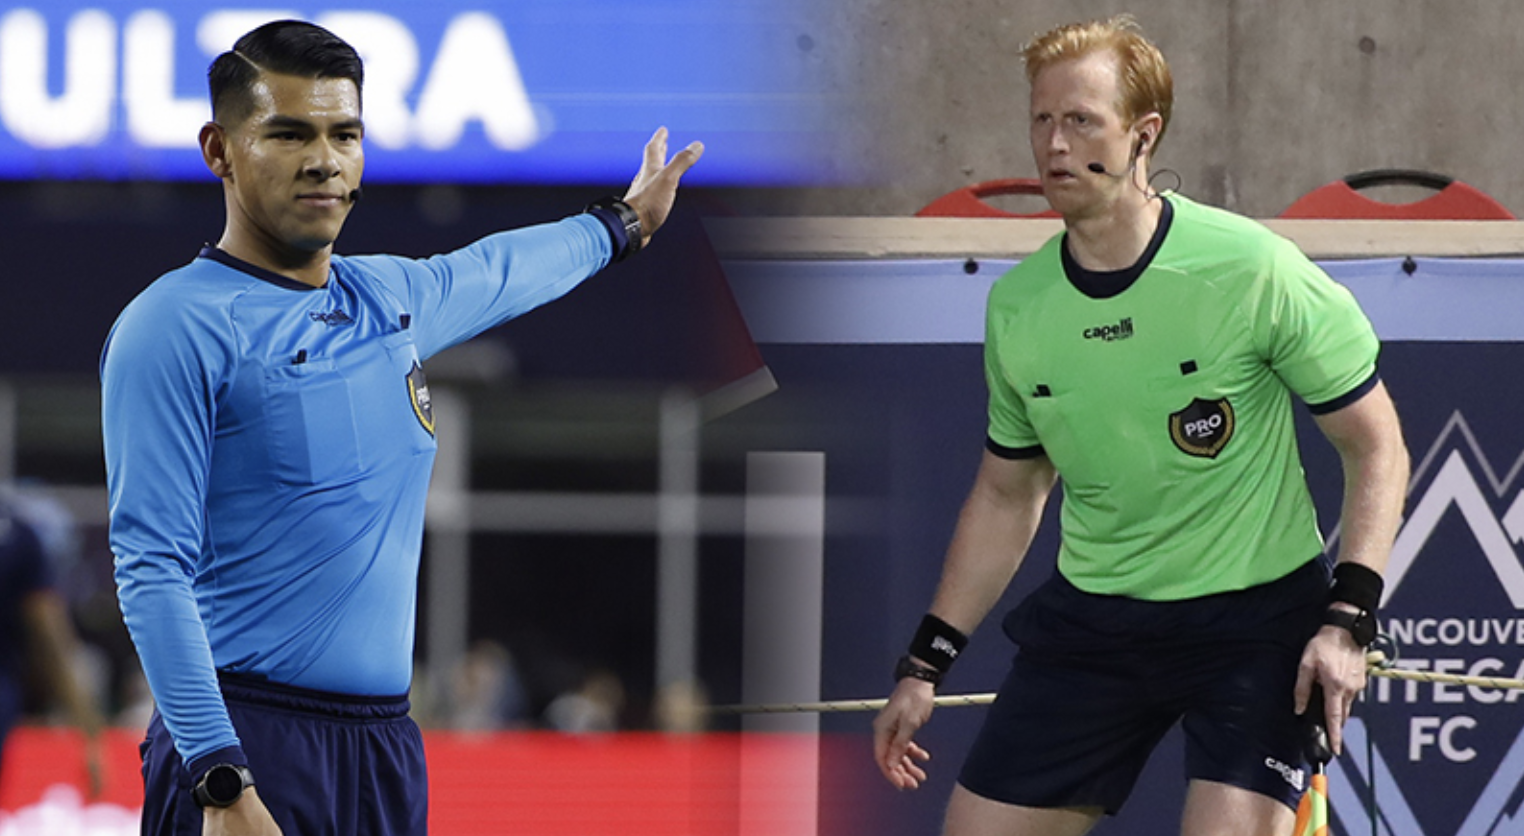 Victor Rivas named MLS Referee of the Year, Ian McKay earns MLS Assistant Referee of the Year accolades